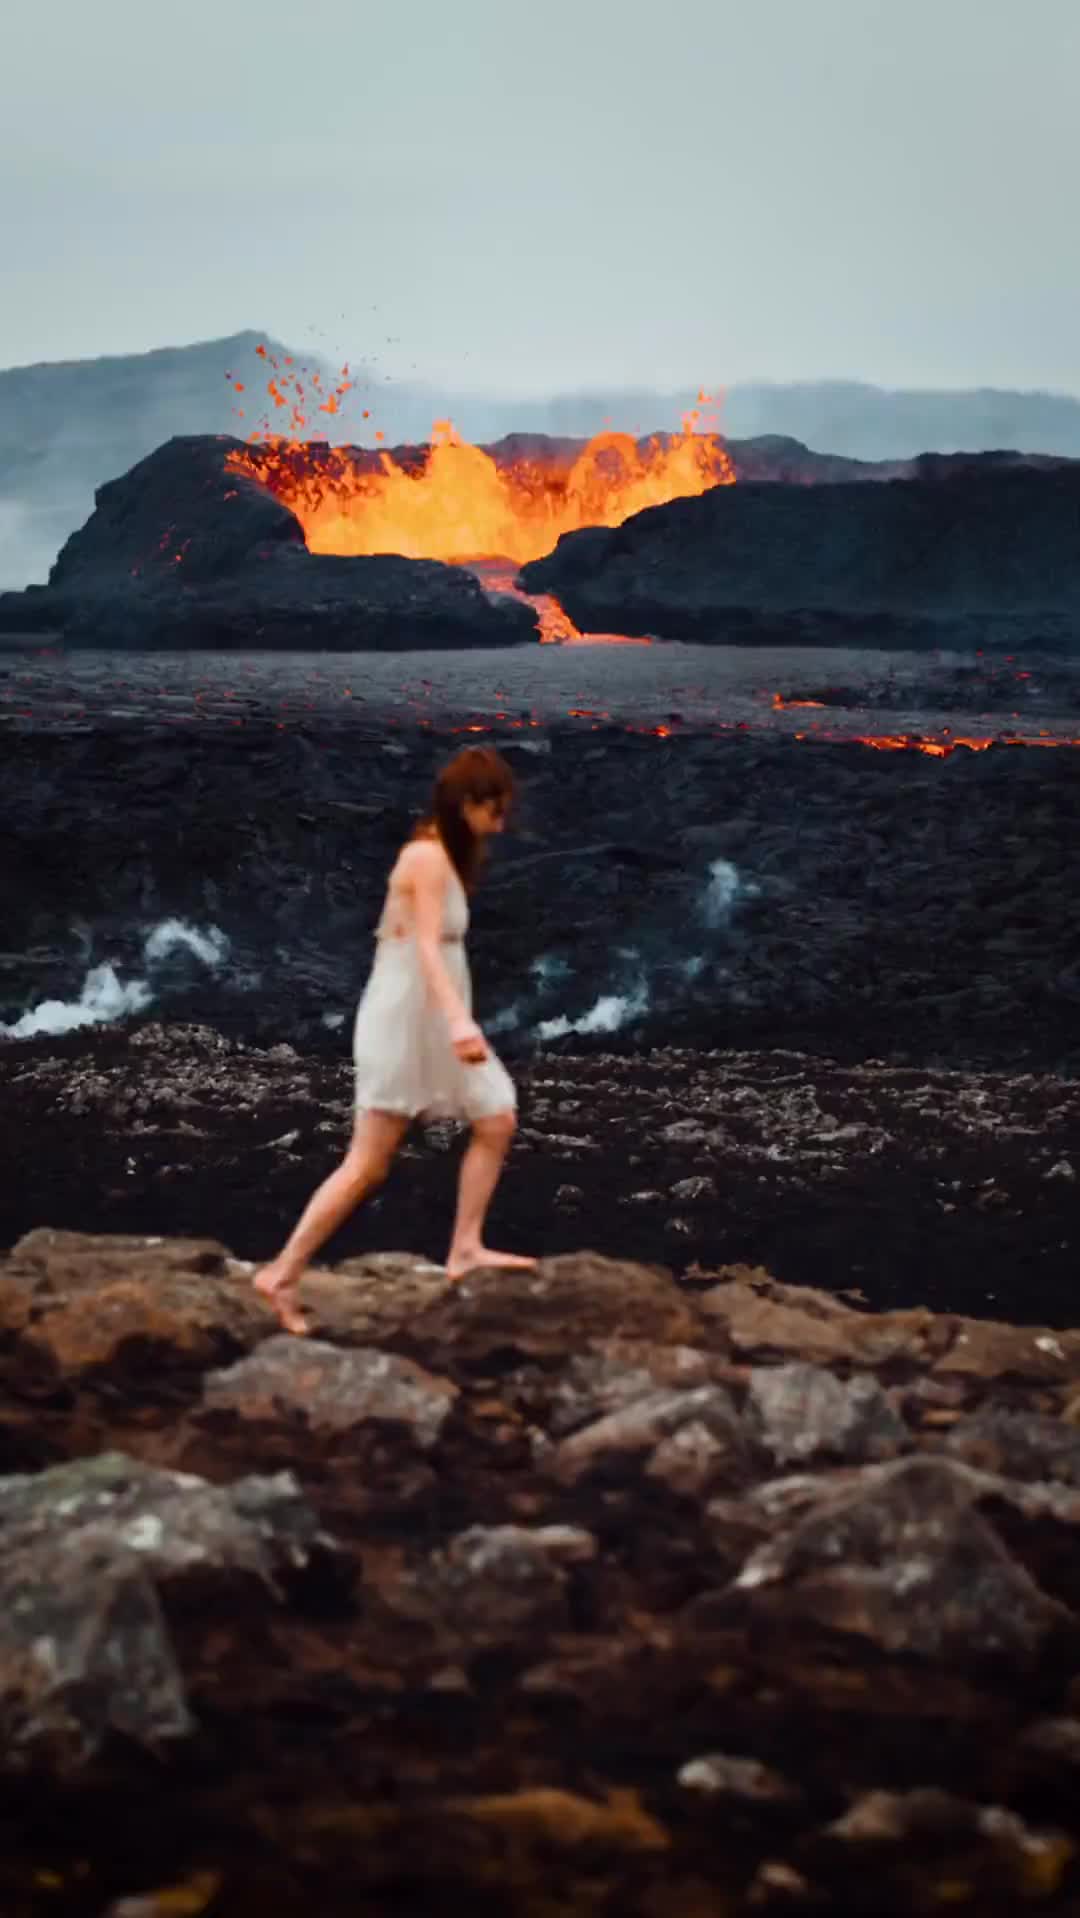 Surreal Iceland Summer: Witness an Active Volcano 🌋